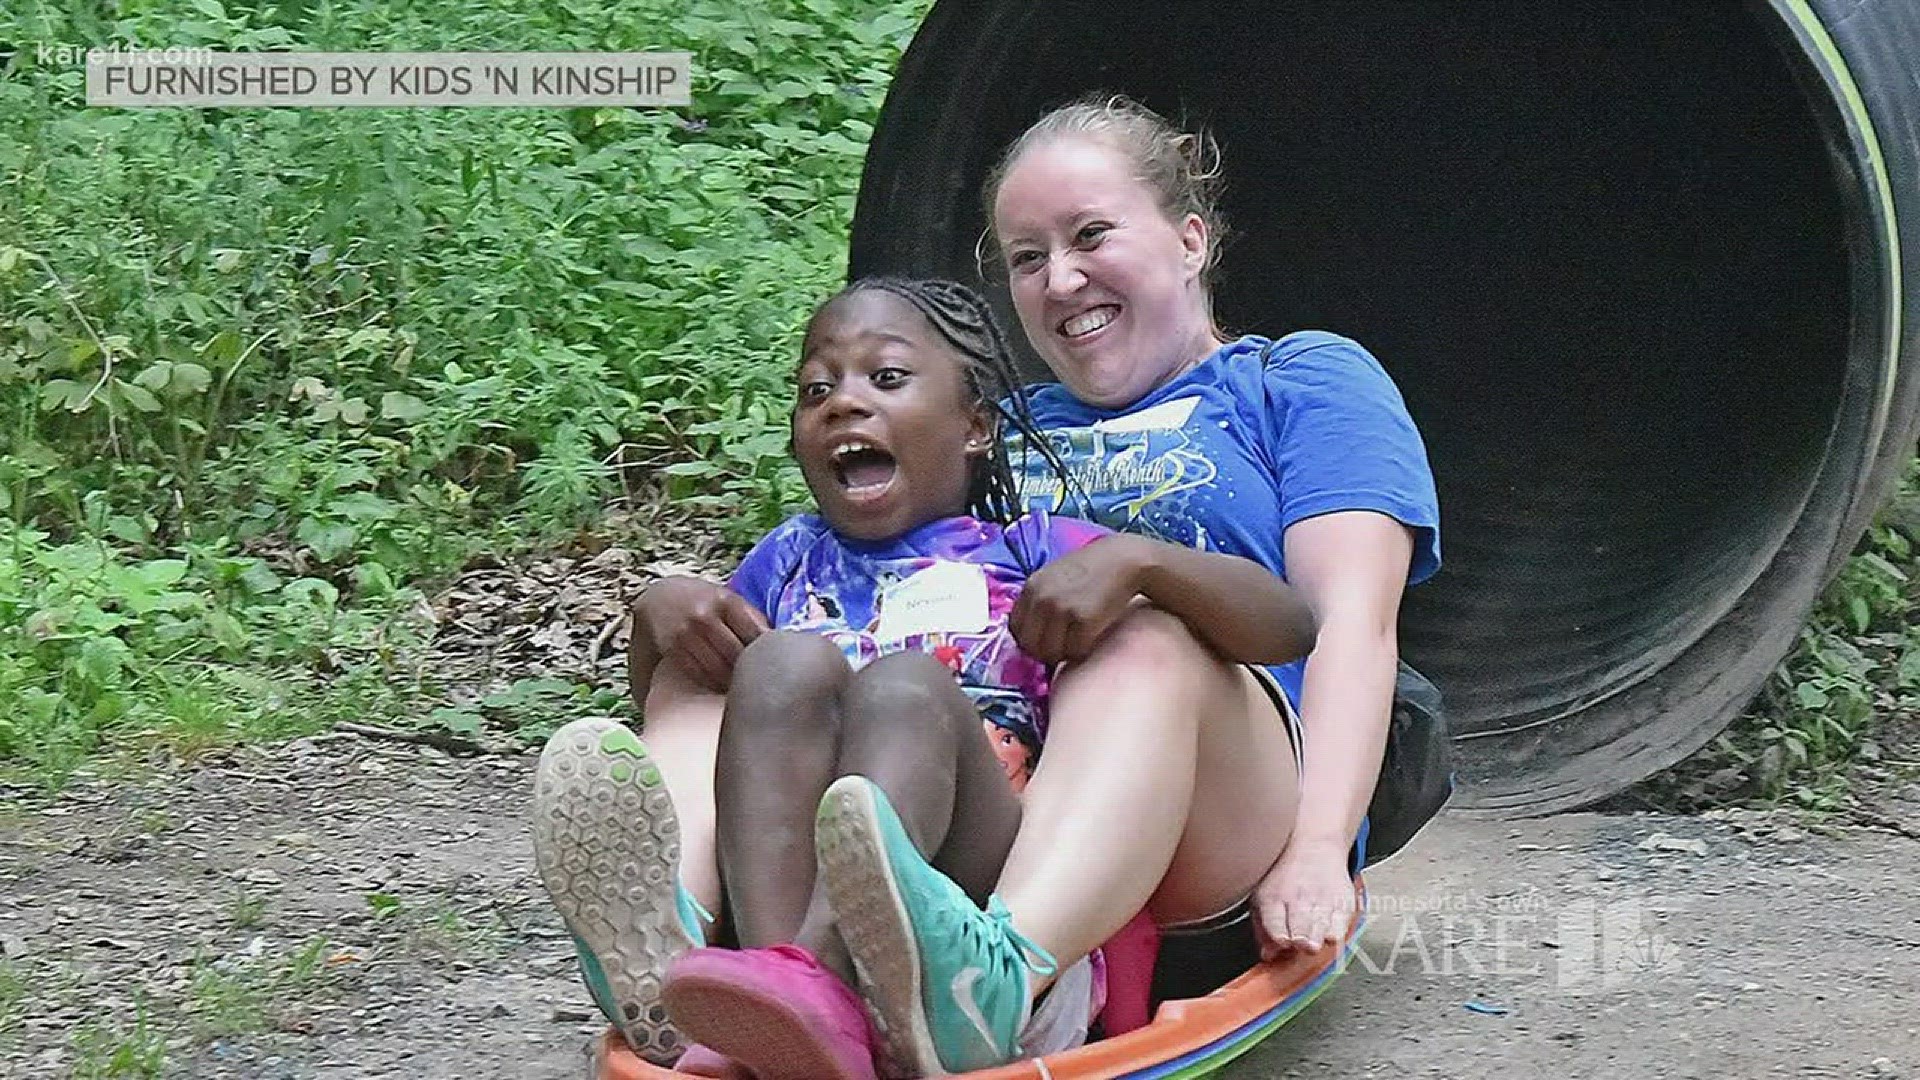 Kids 'n Kinship is local non-profit organization that matches kids ages 5-16 with volunteer mentors for fun and engaging weekly activities in the community. http://kare11.tv/2r6YT8x